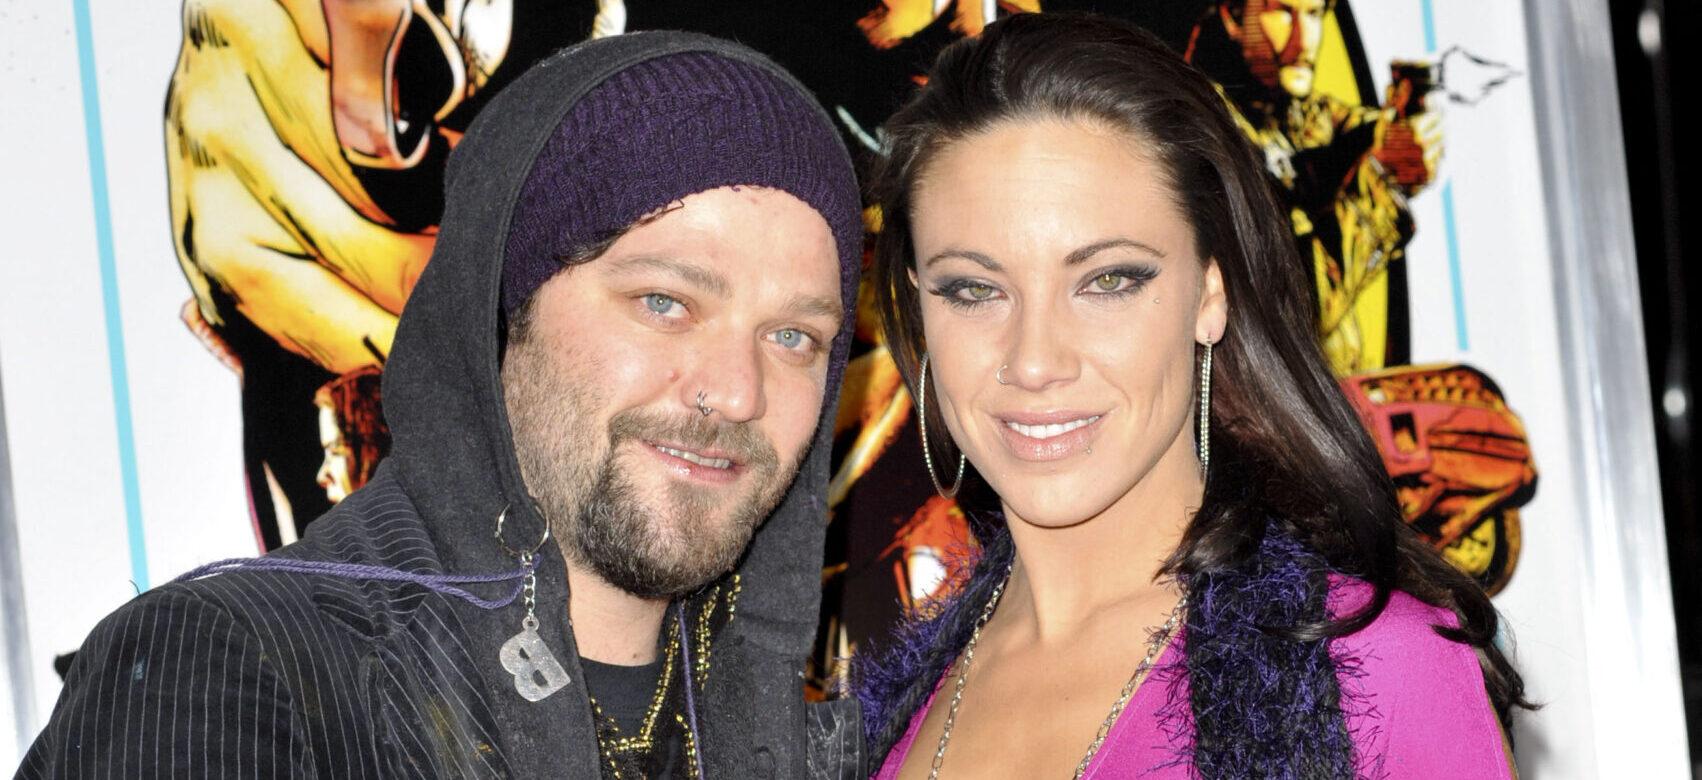 Bam Margera’s Estranged Wife Slams Claim By The Actor That They Were ‘Never Legally Married’